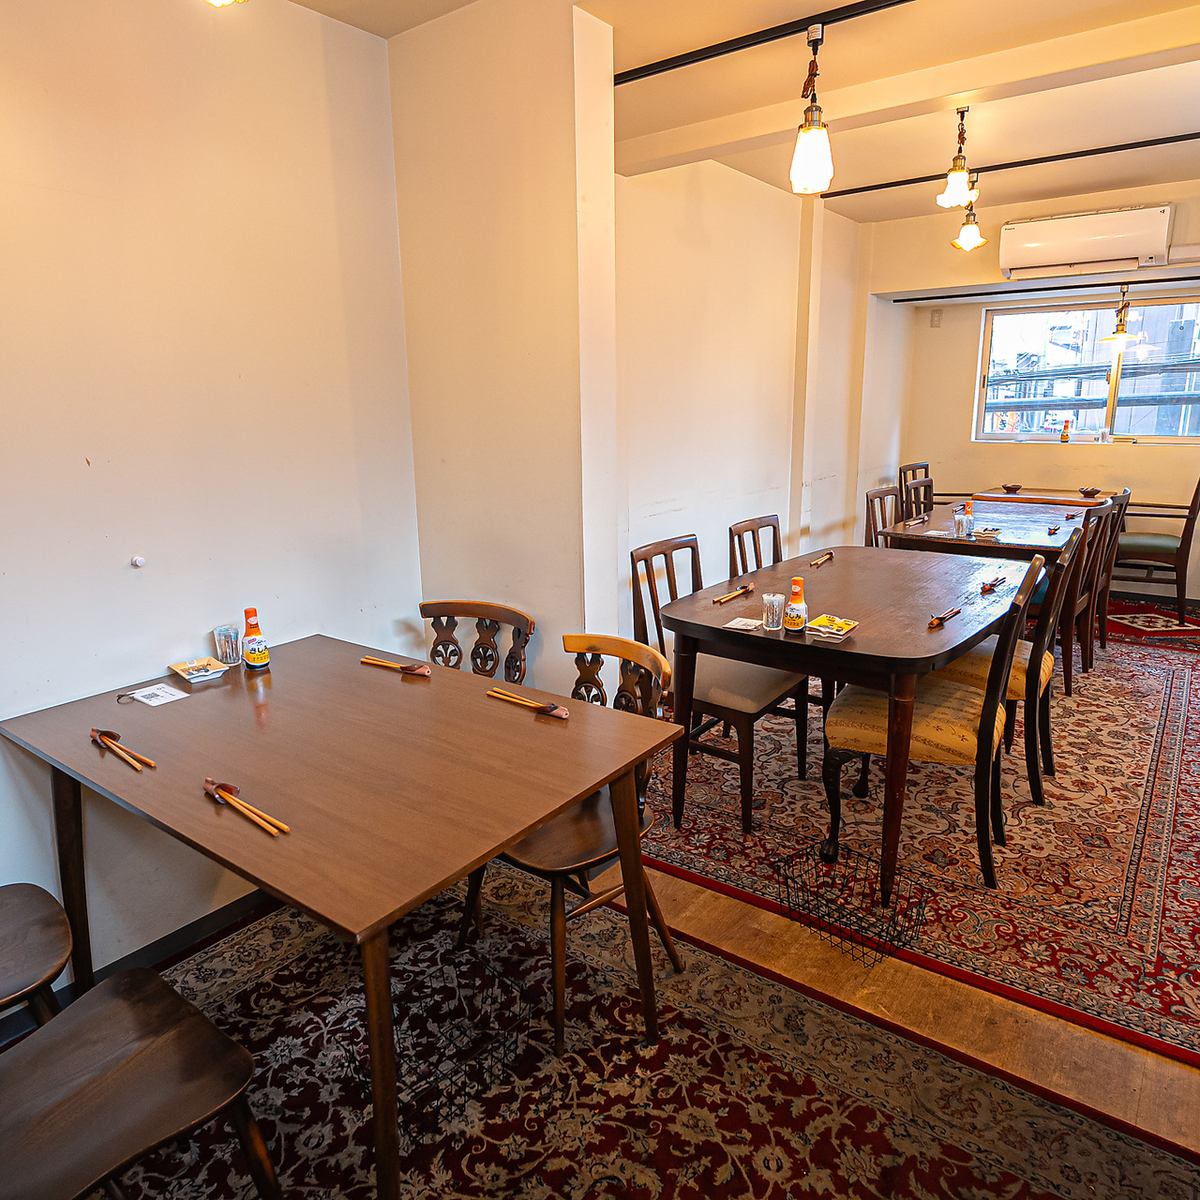 The second floor has a private room that can accommodate up to 12 people.